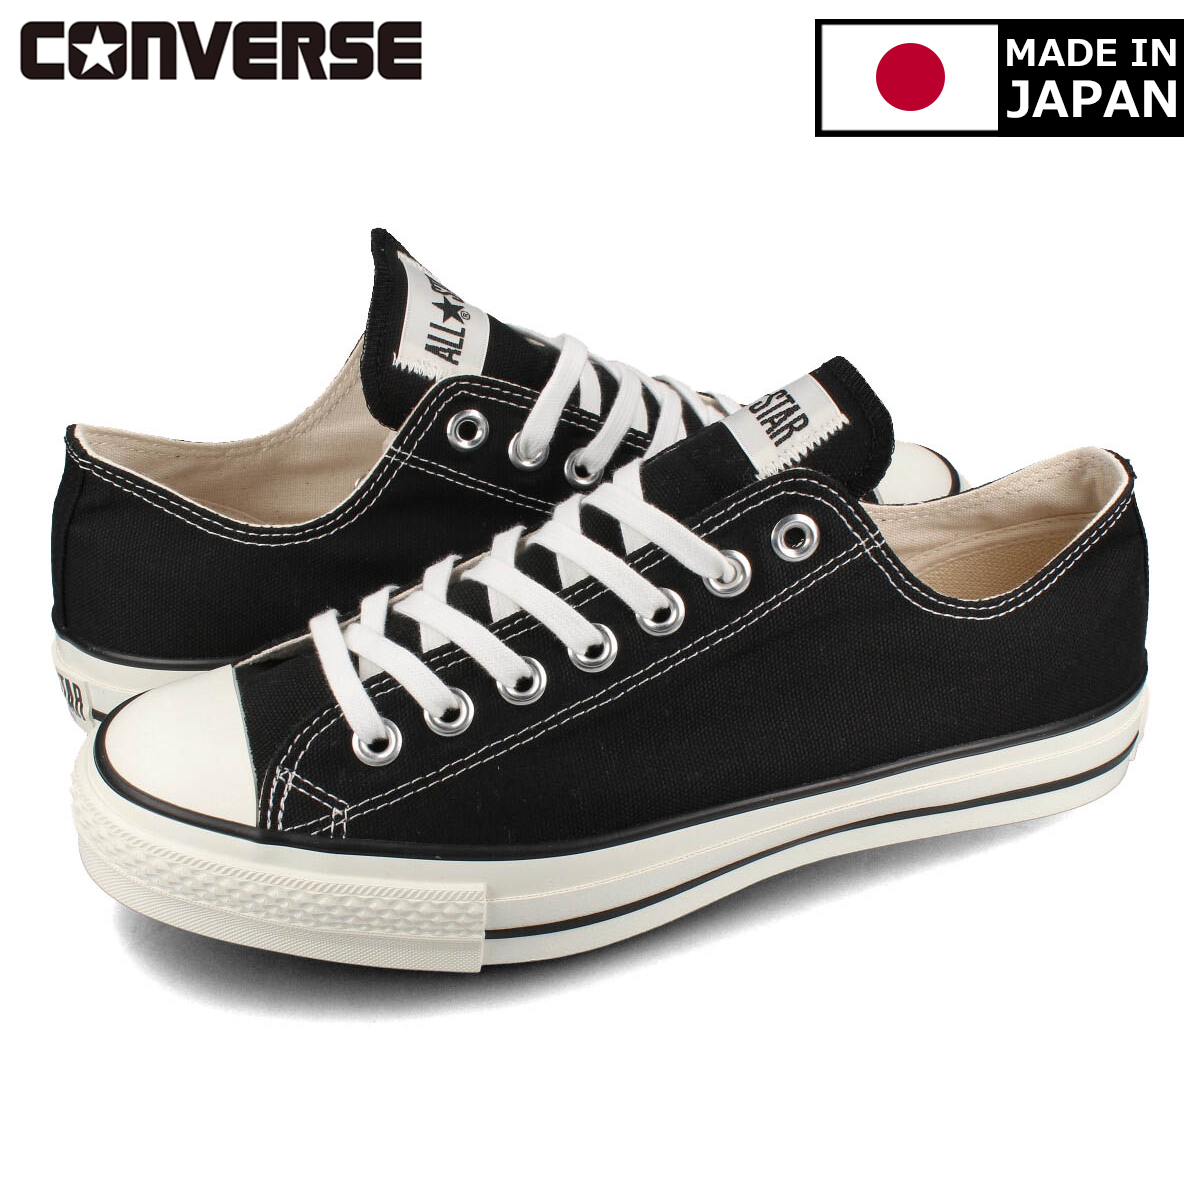 converse all star low made in Japan